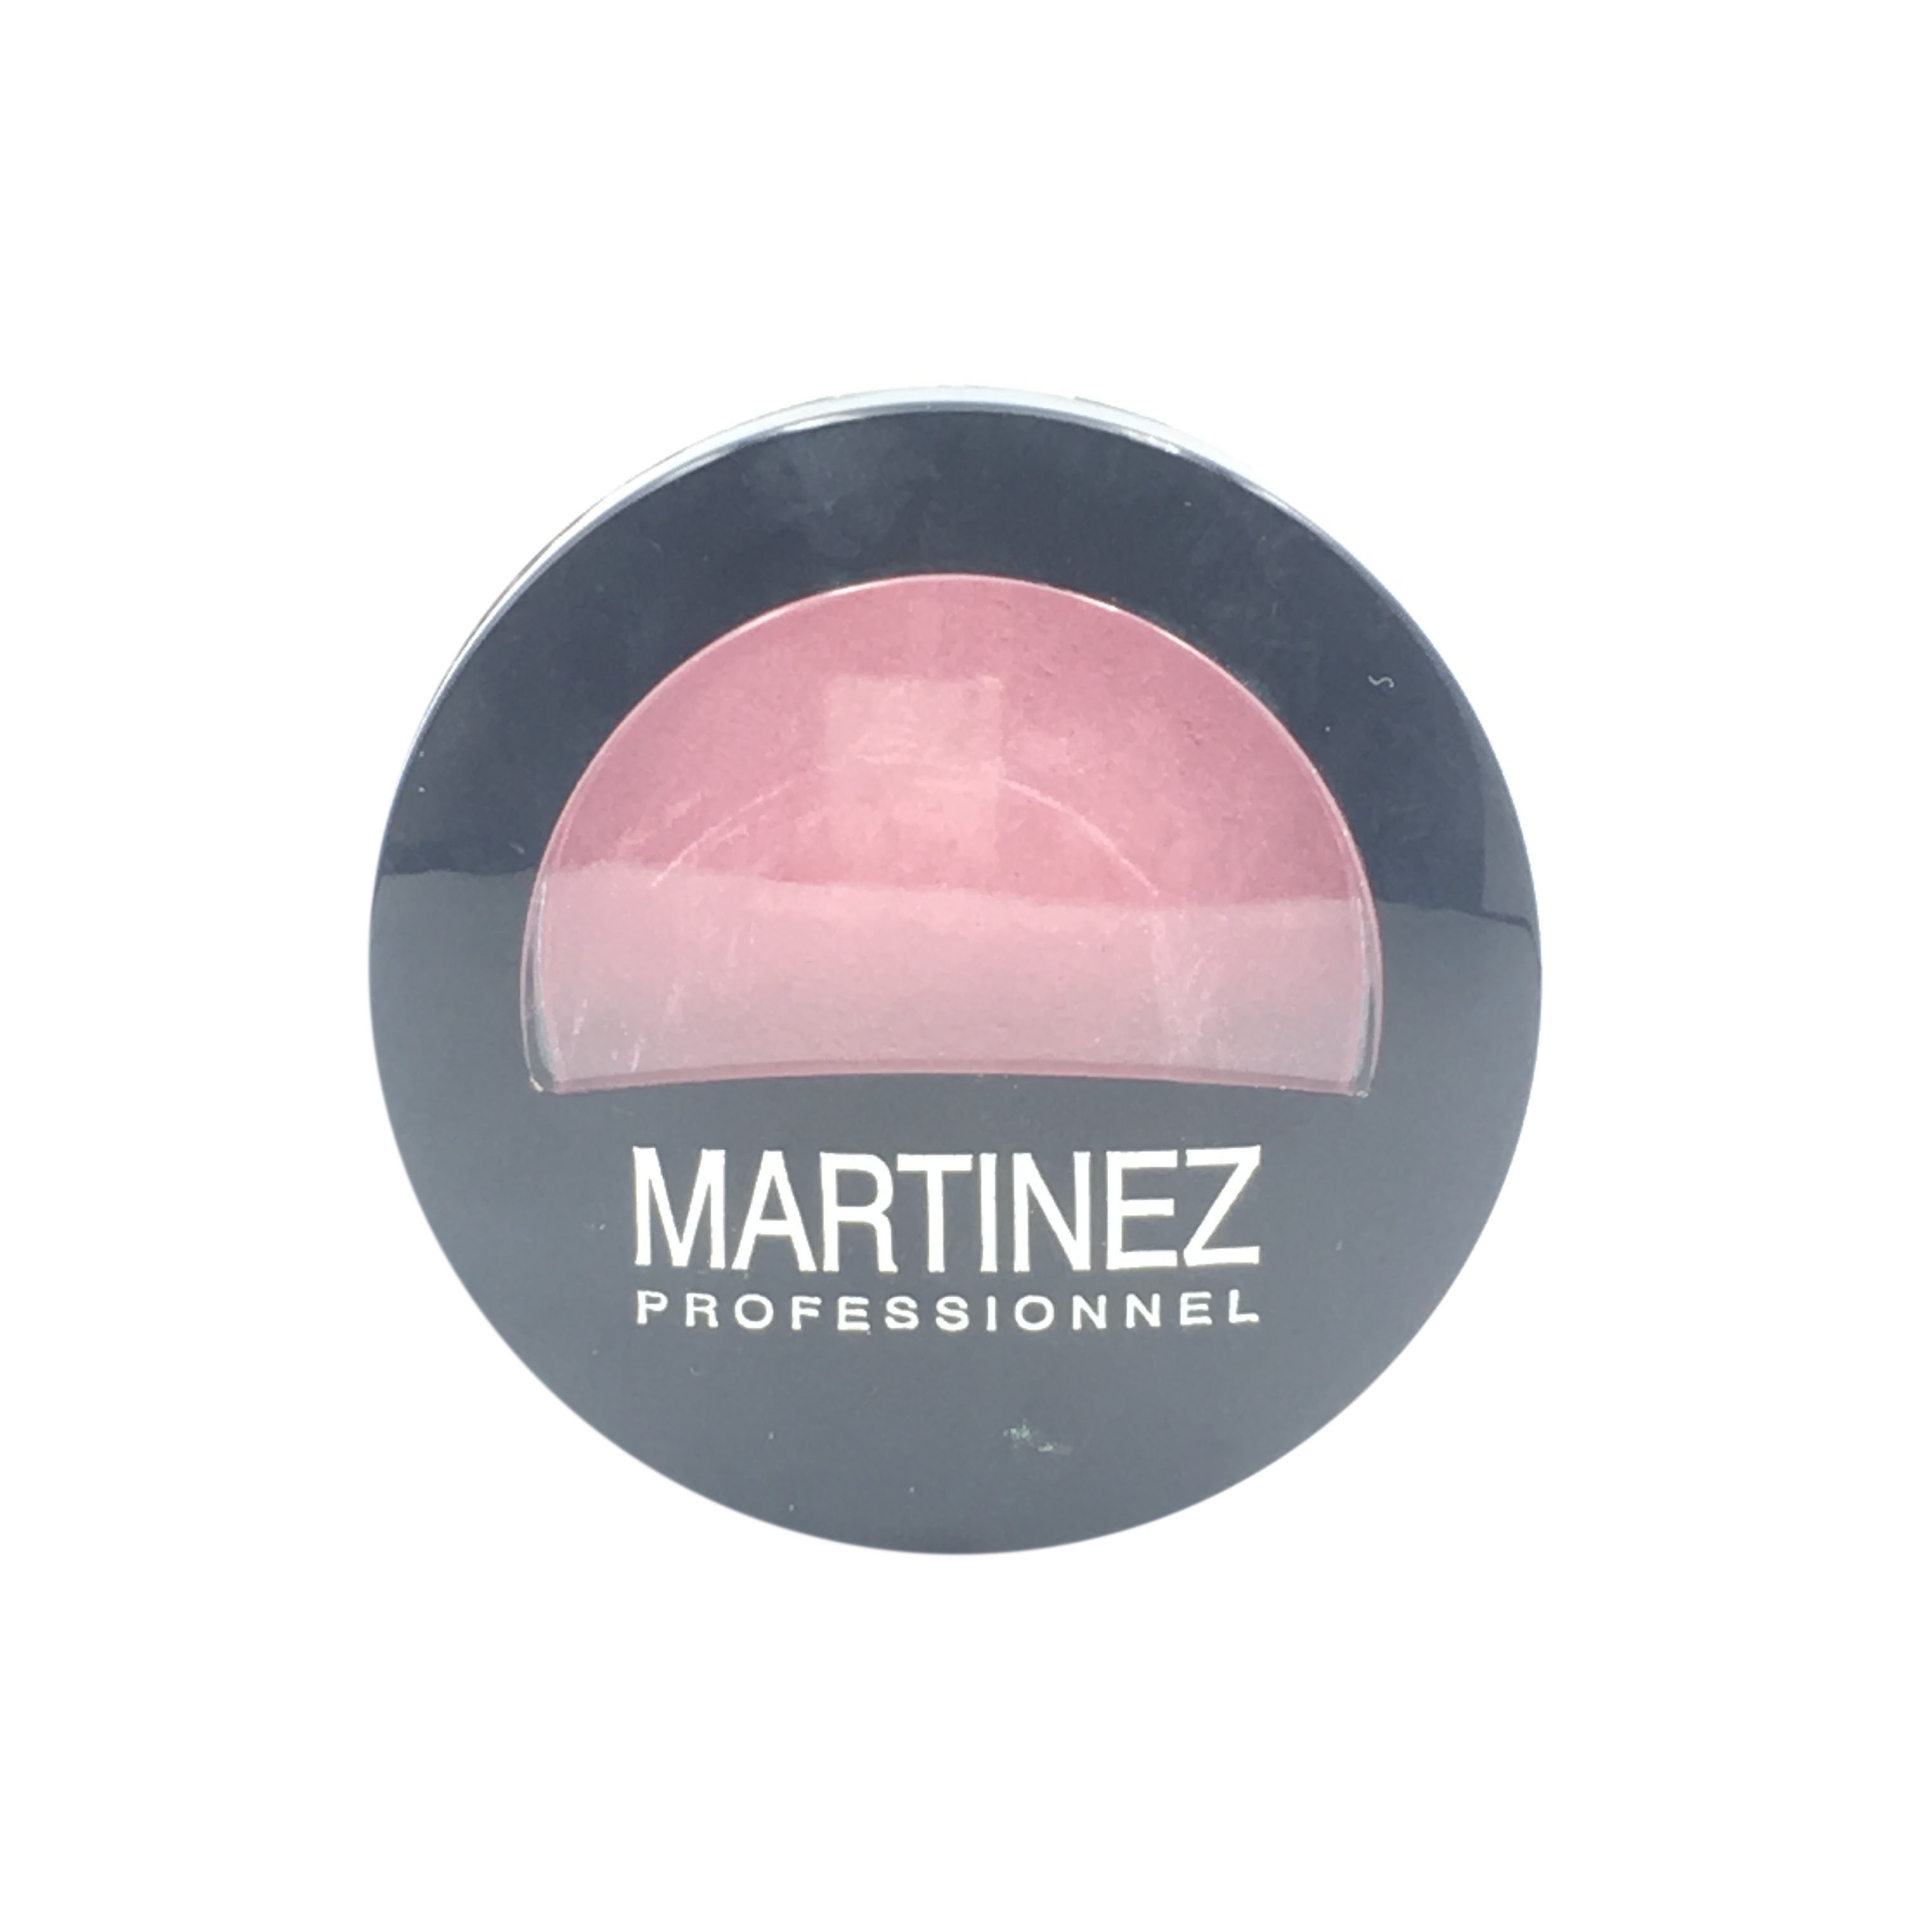 Private Collection Martinez Professionel Glam Blush On Shade 01 Rose Temptation Faces